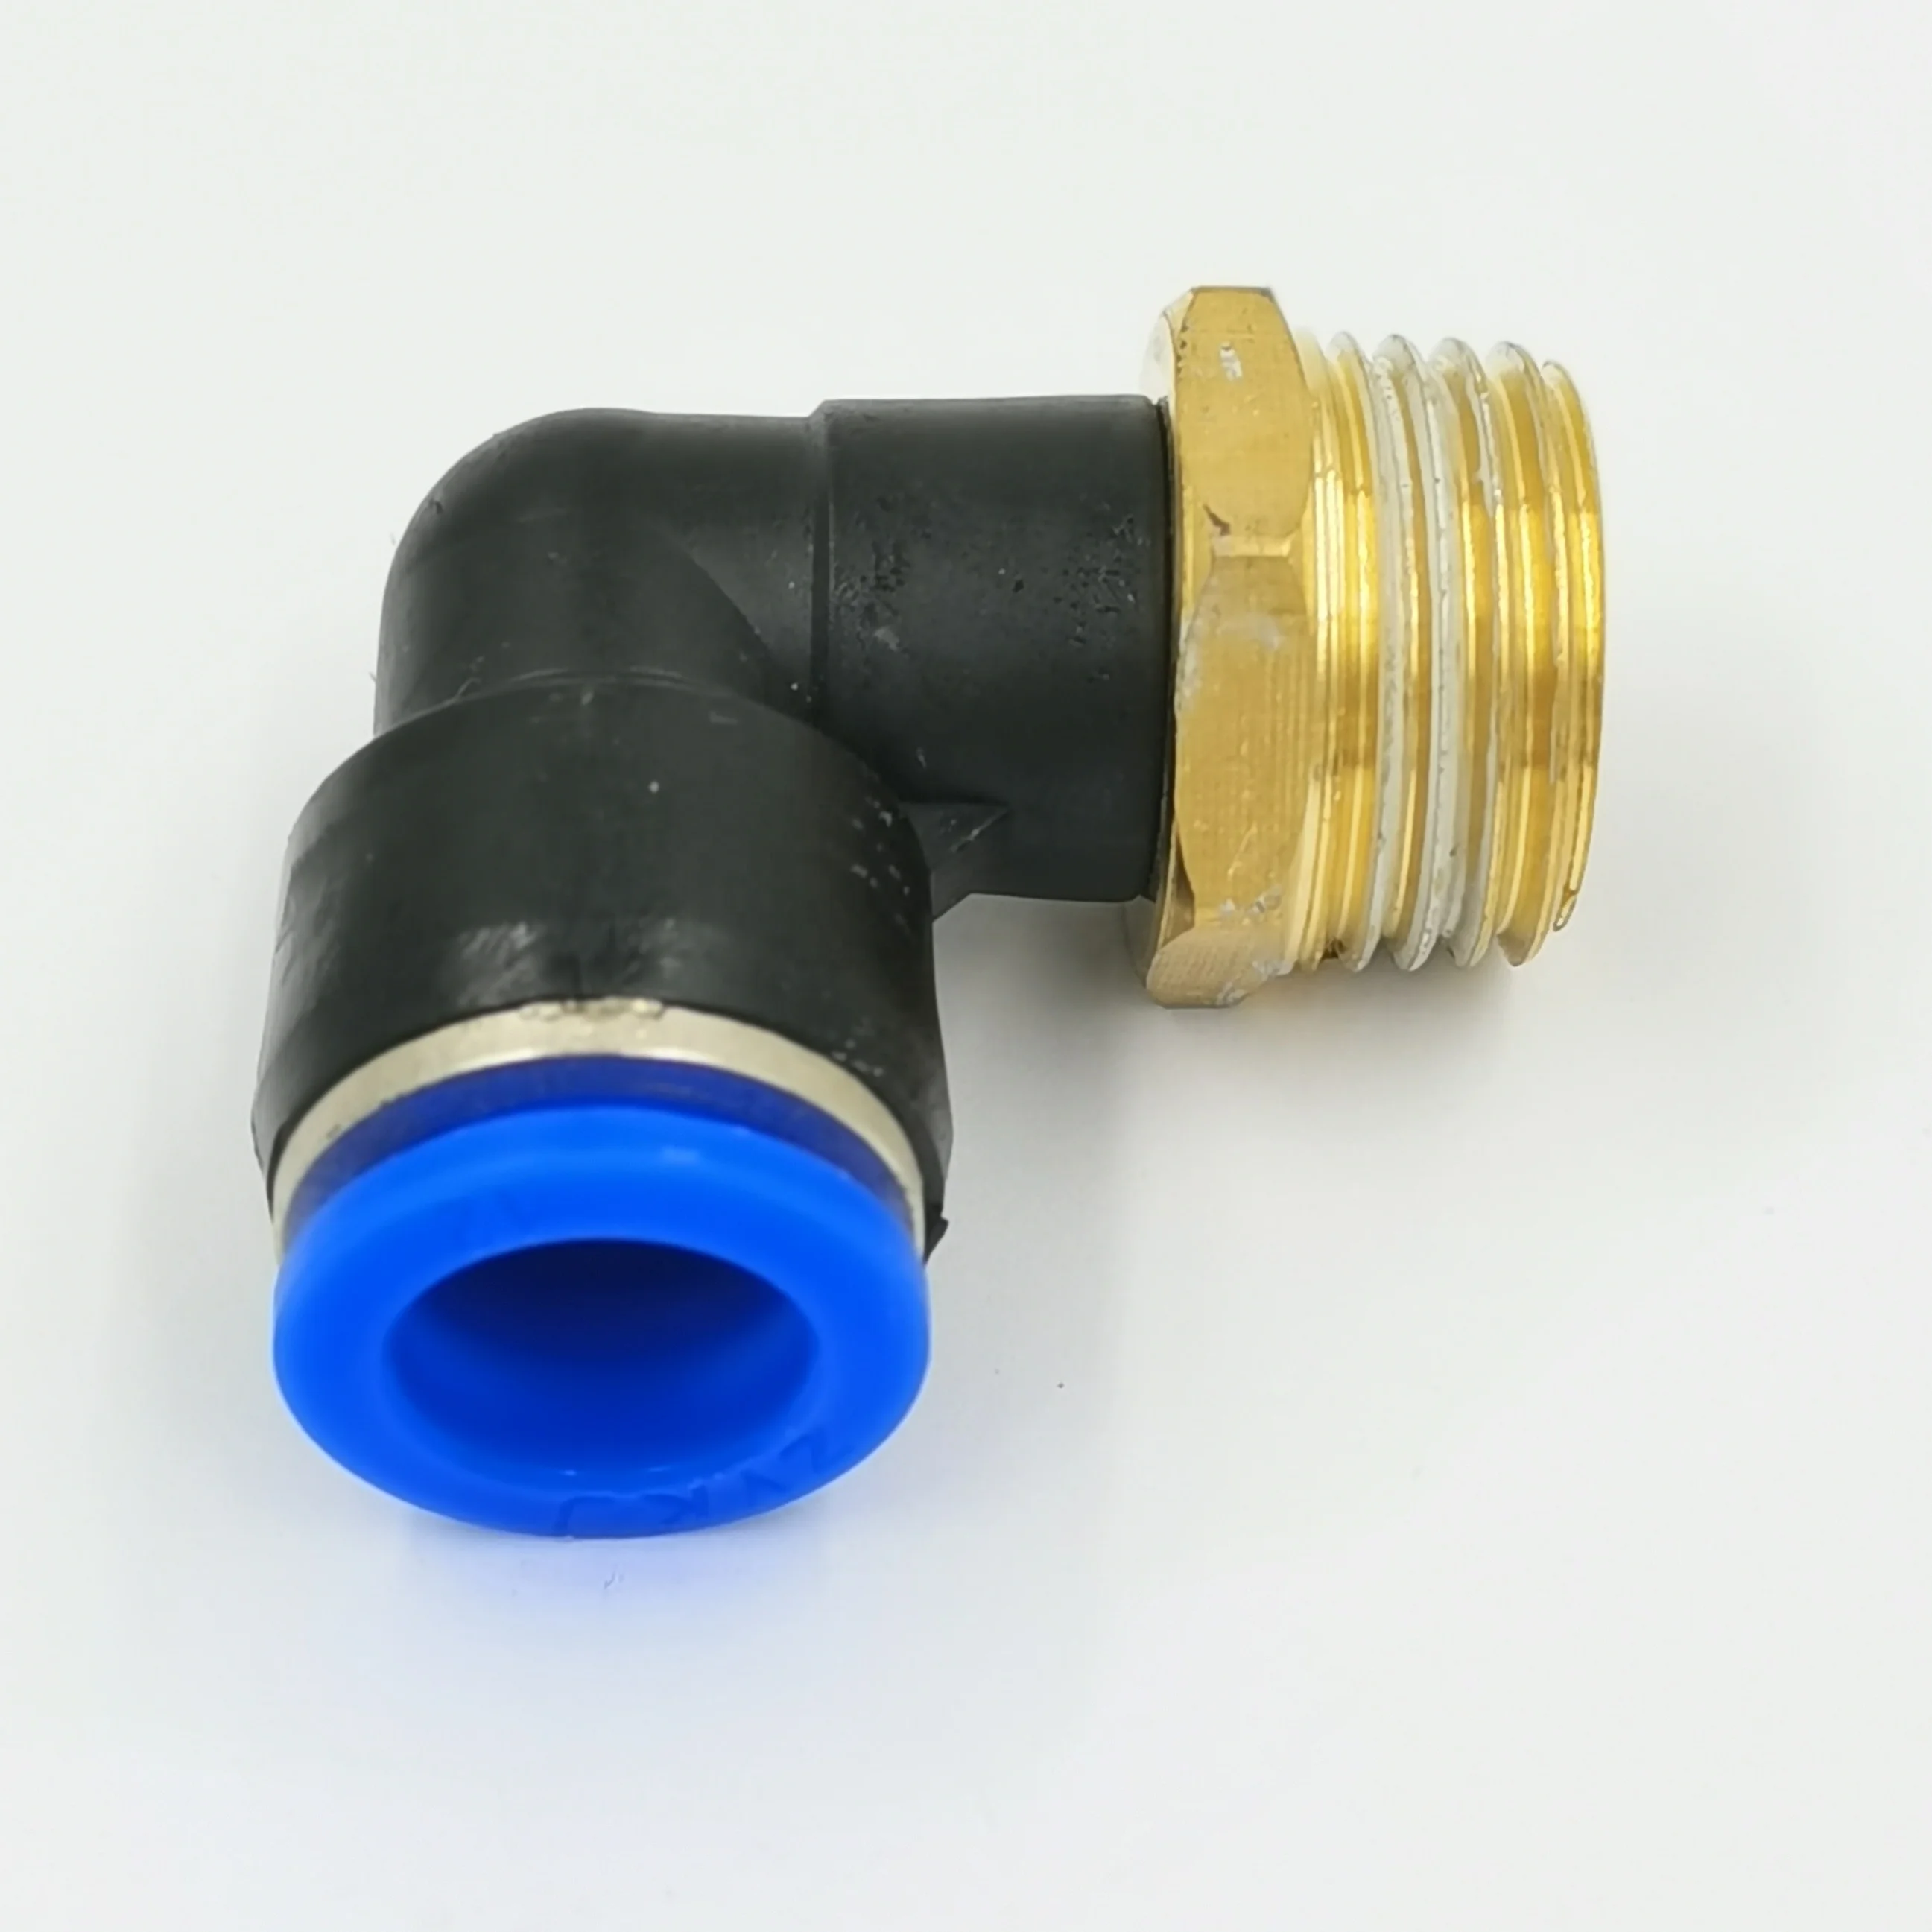 Pneumatic Air Fittings 5 x 8mm Tube-to-Tube Equal Elbow Push Fit Connectors 